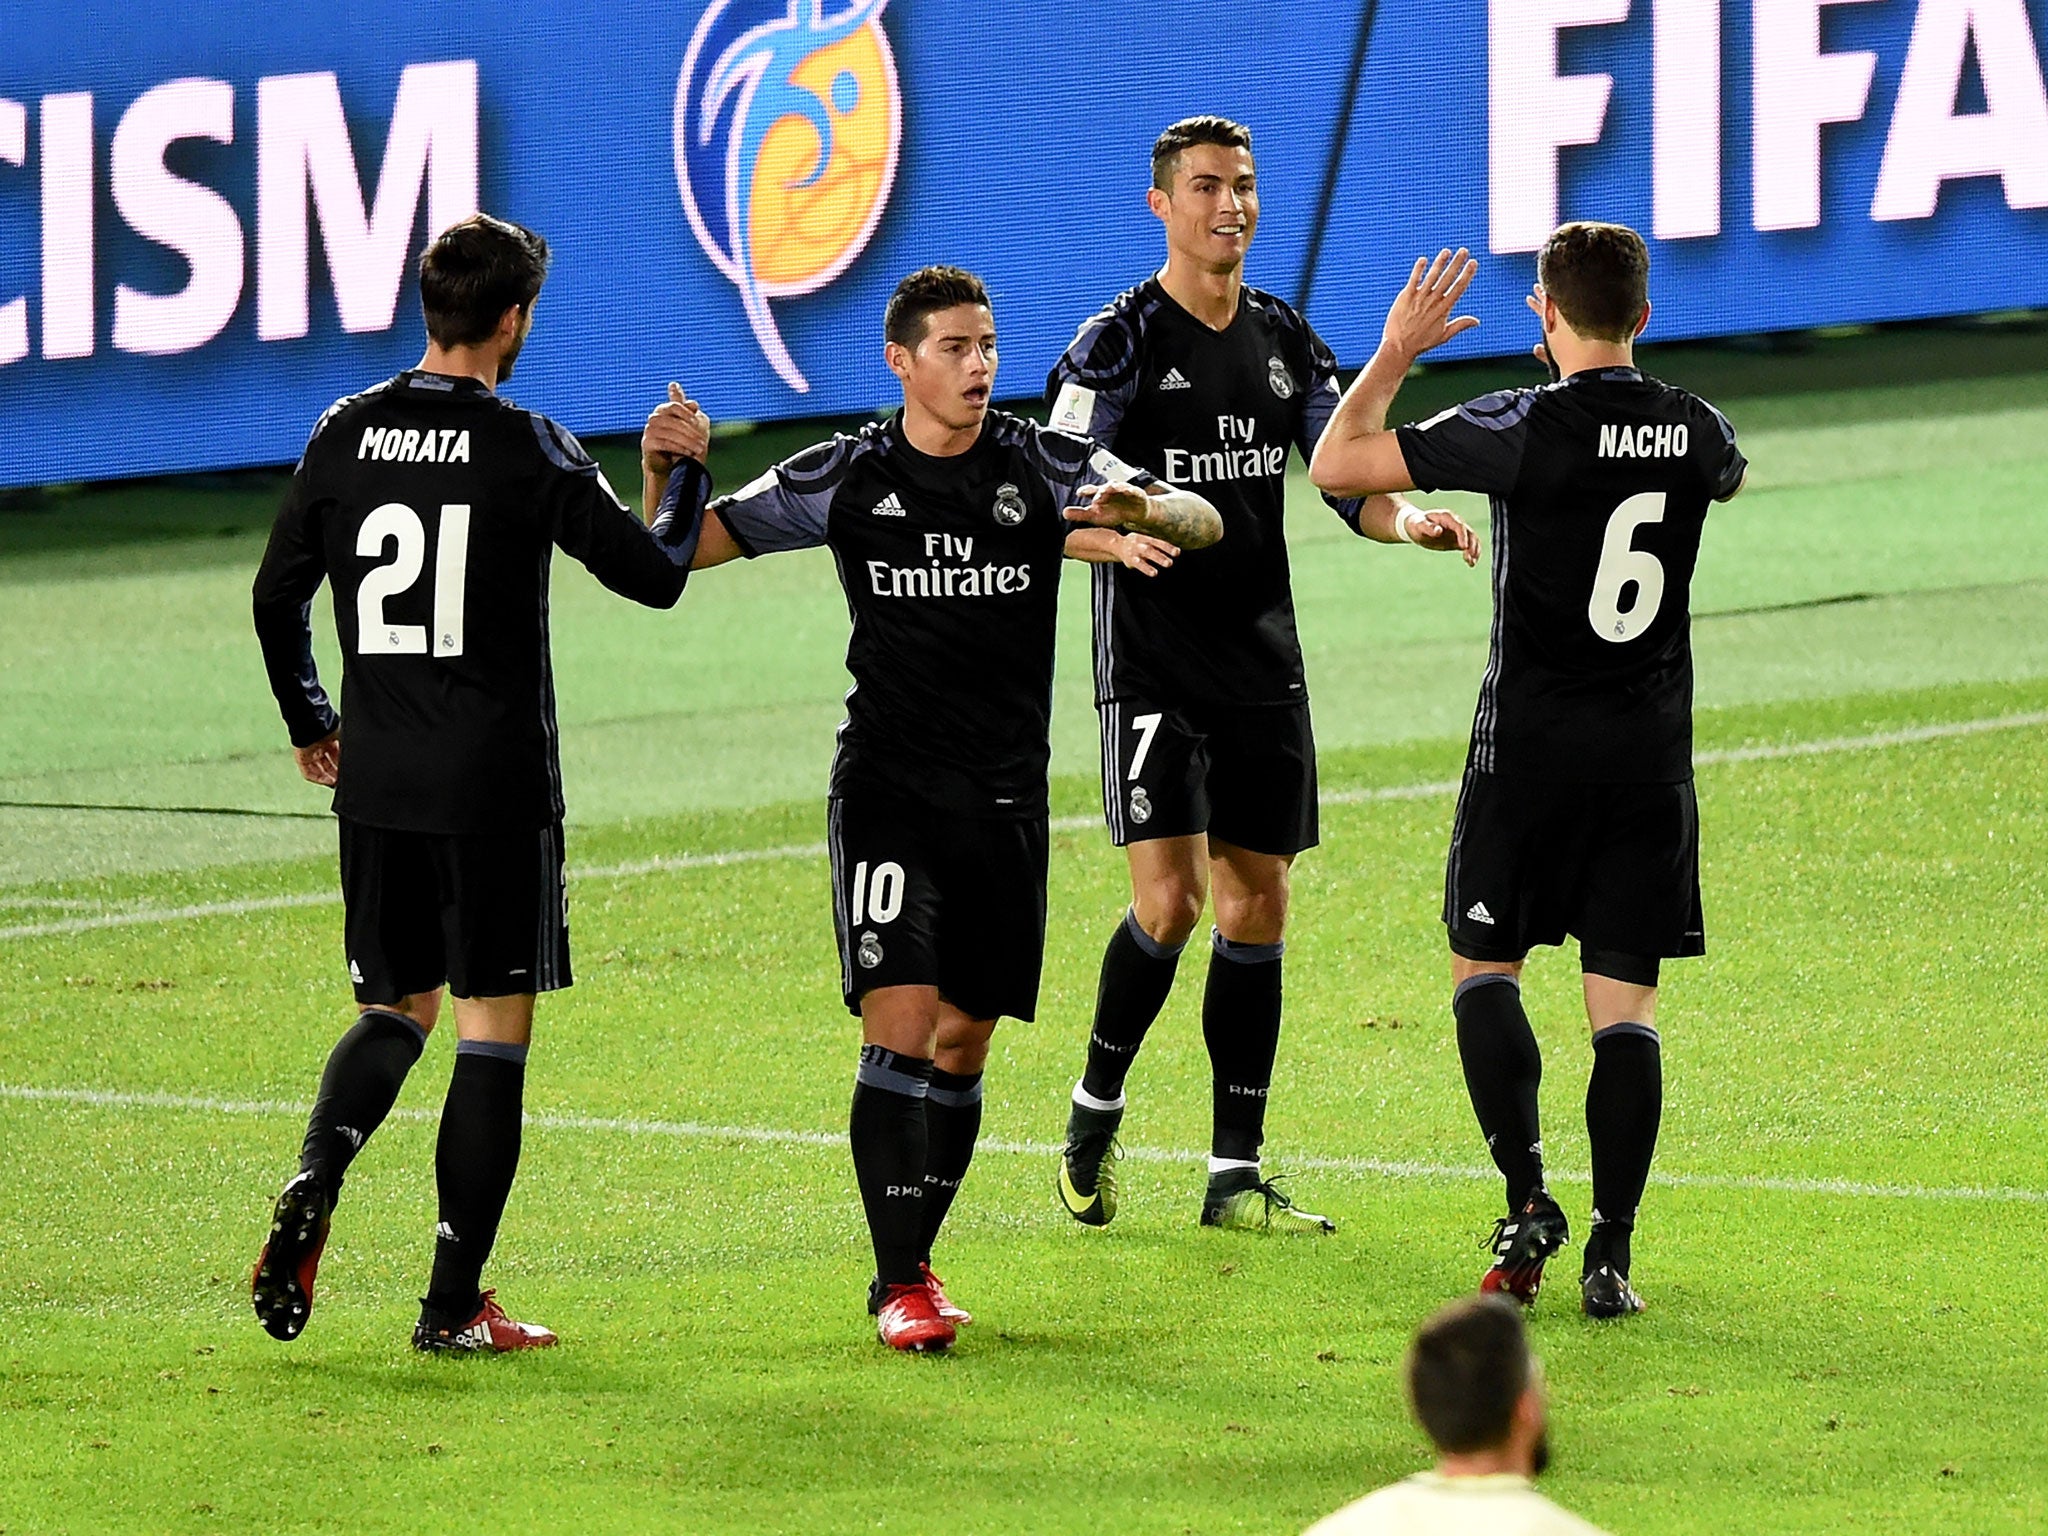 Real Madrid's players congratulate Cristiano Ronaldo on his late goal at the Nissan Stadium